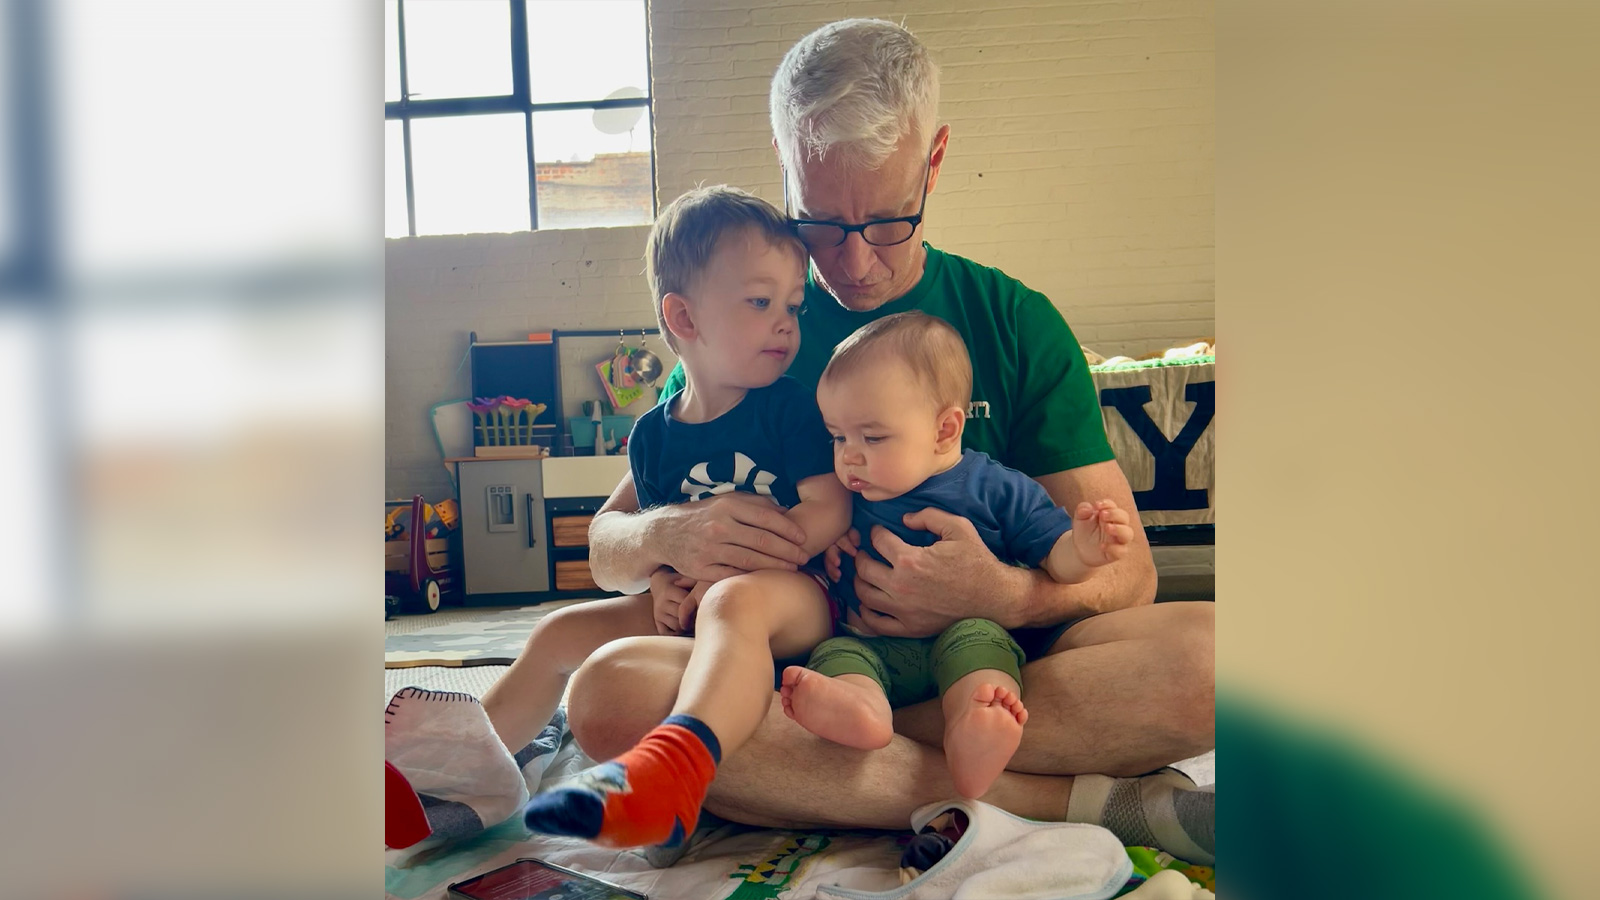 Anderson Cooper with his two sons